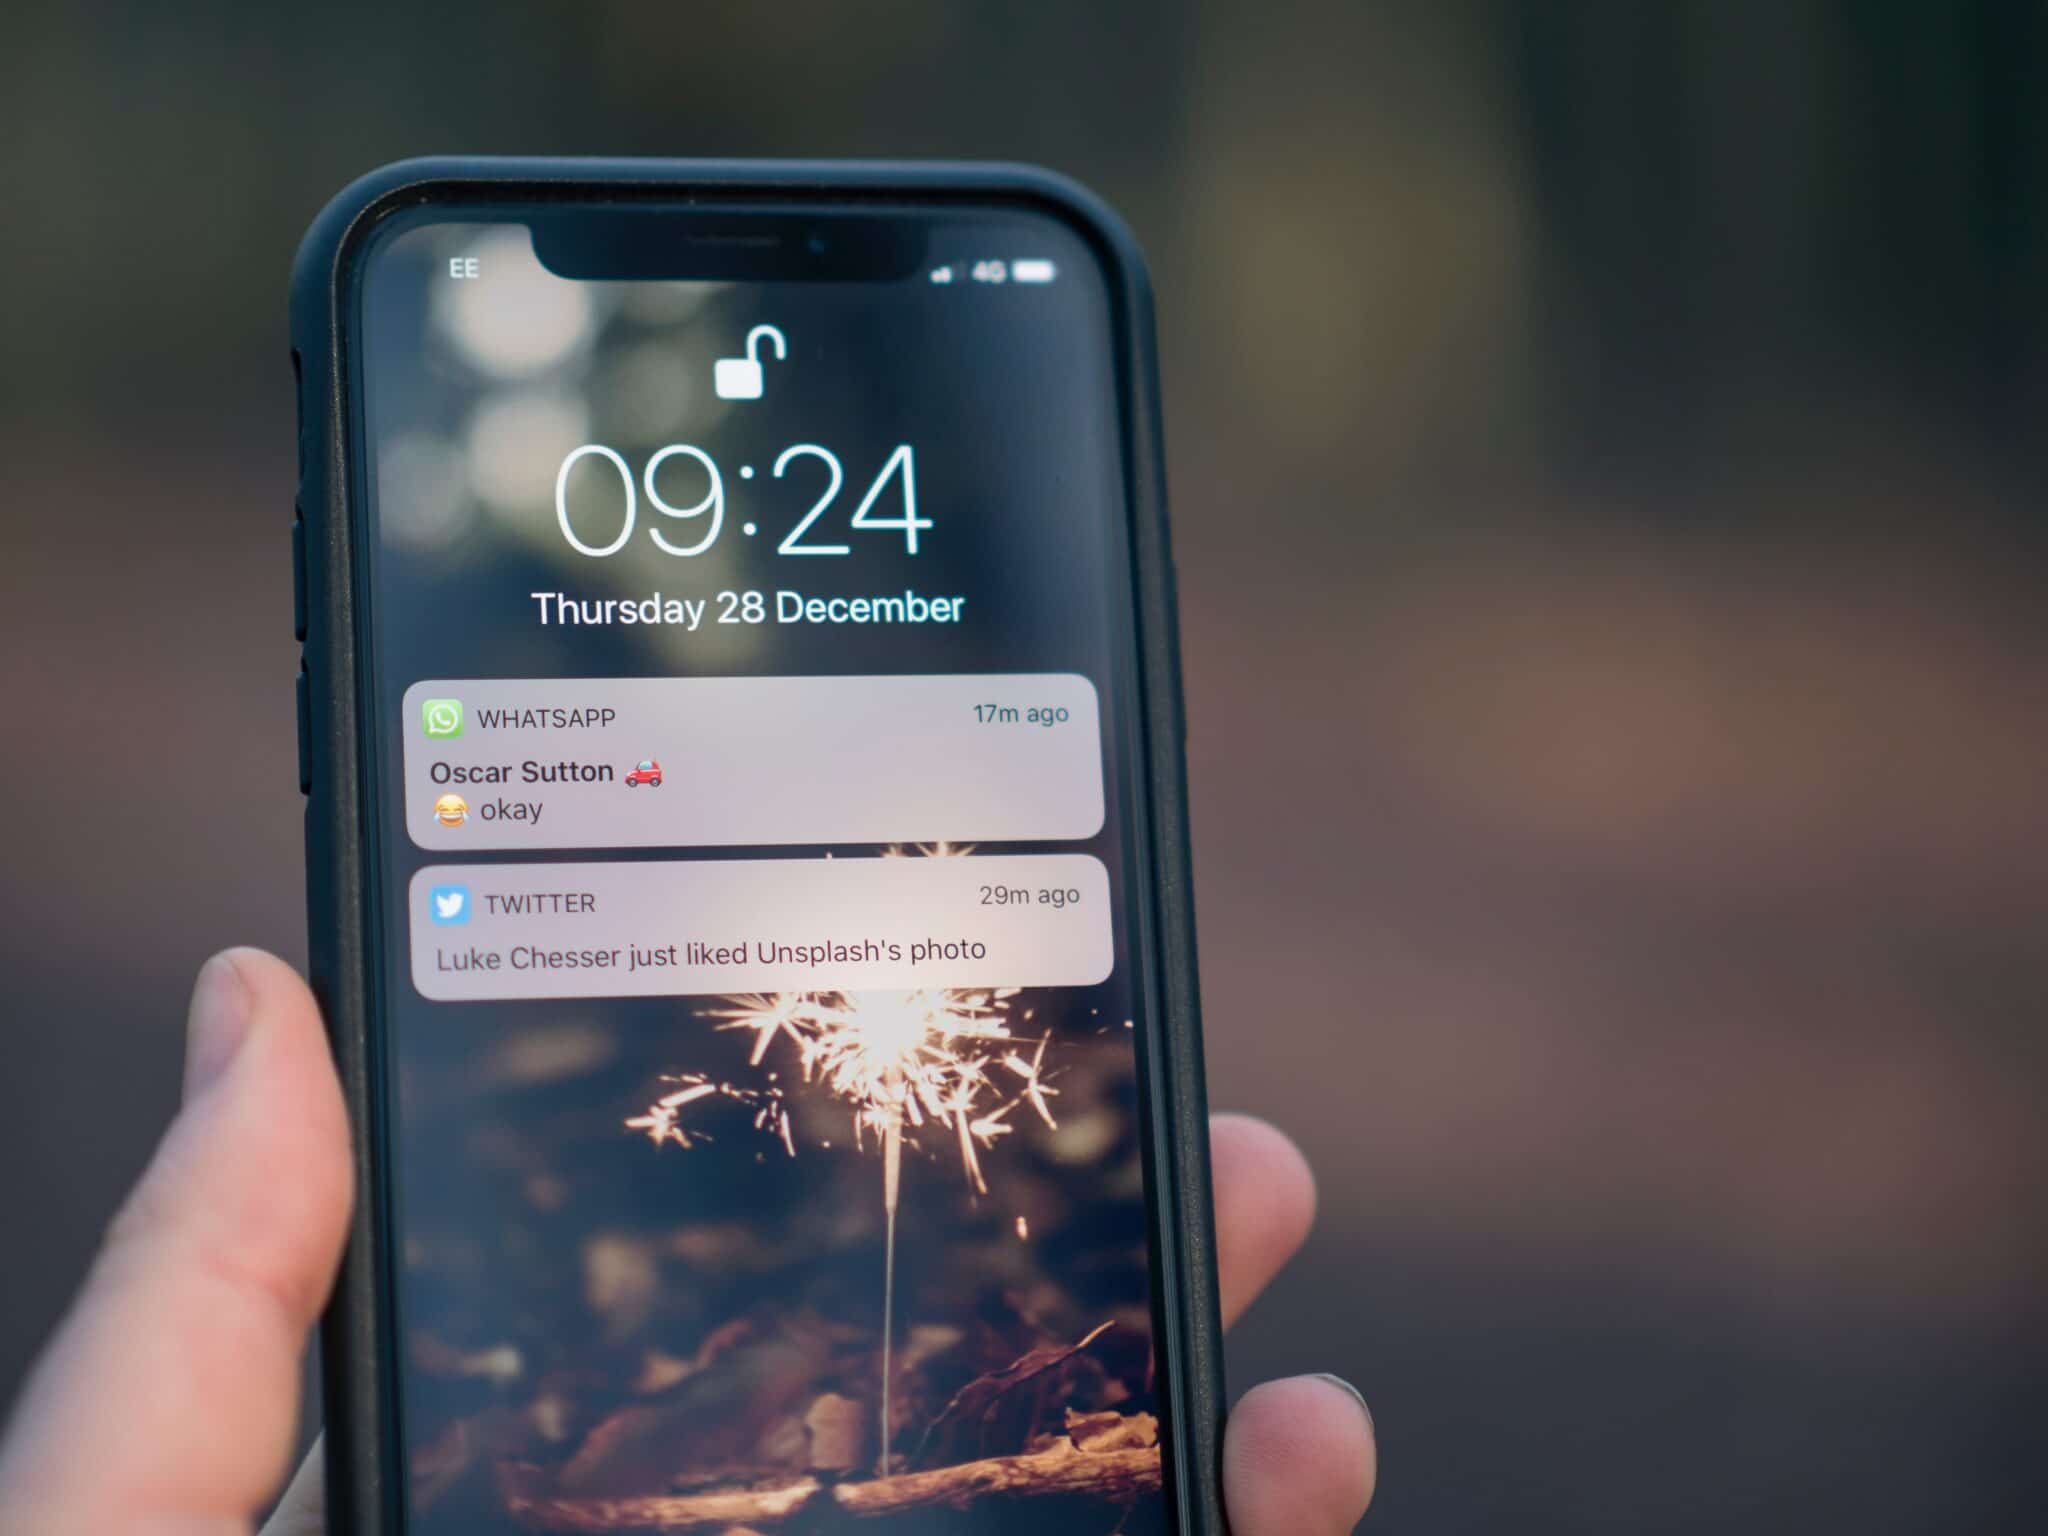 How To Fix Not Getting Text Notifications On iPhone